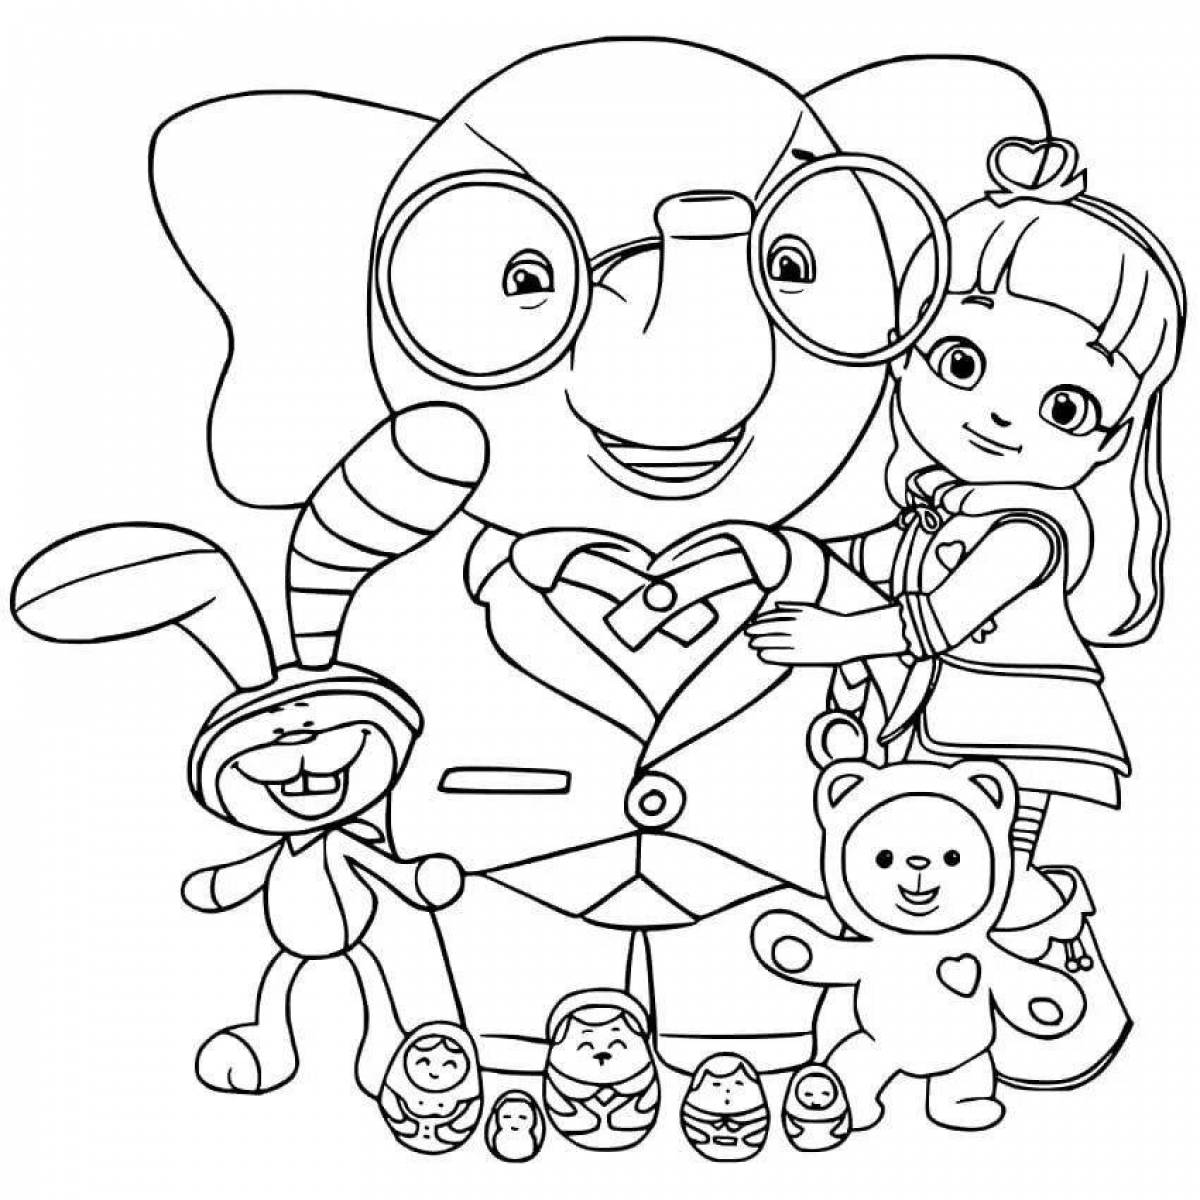 Color-delight rainbow friends coloring page